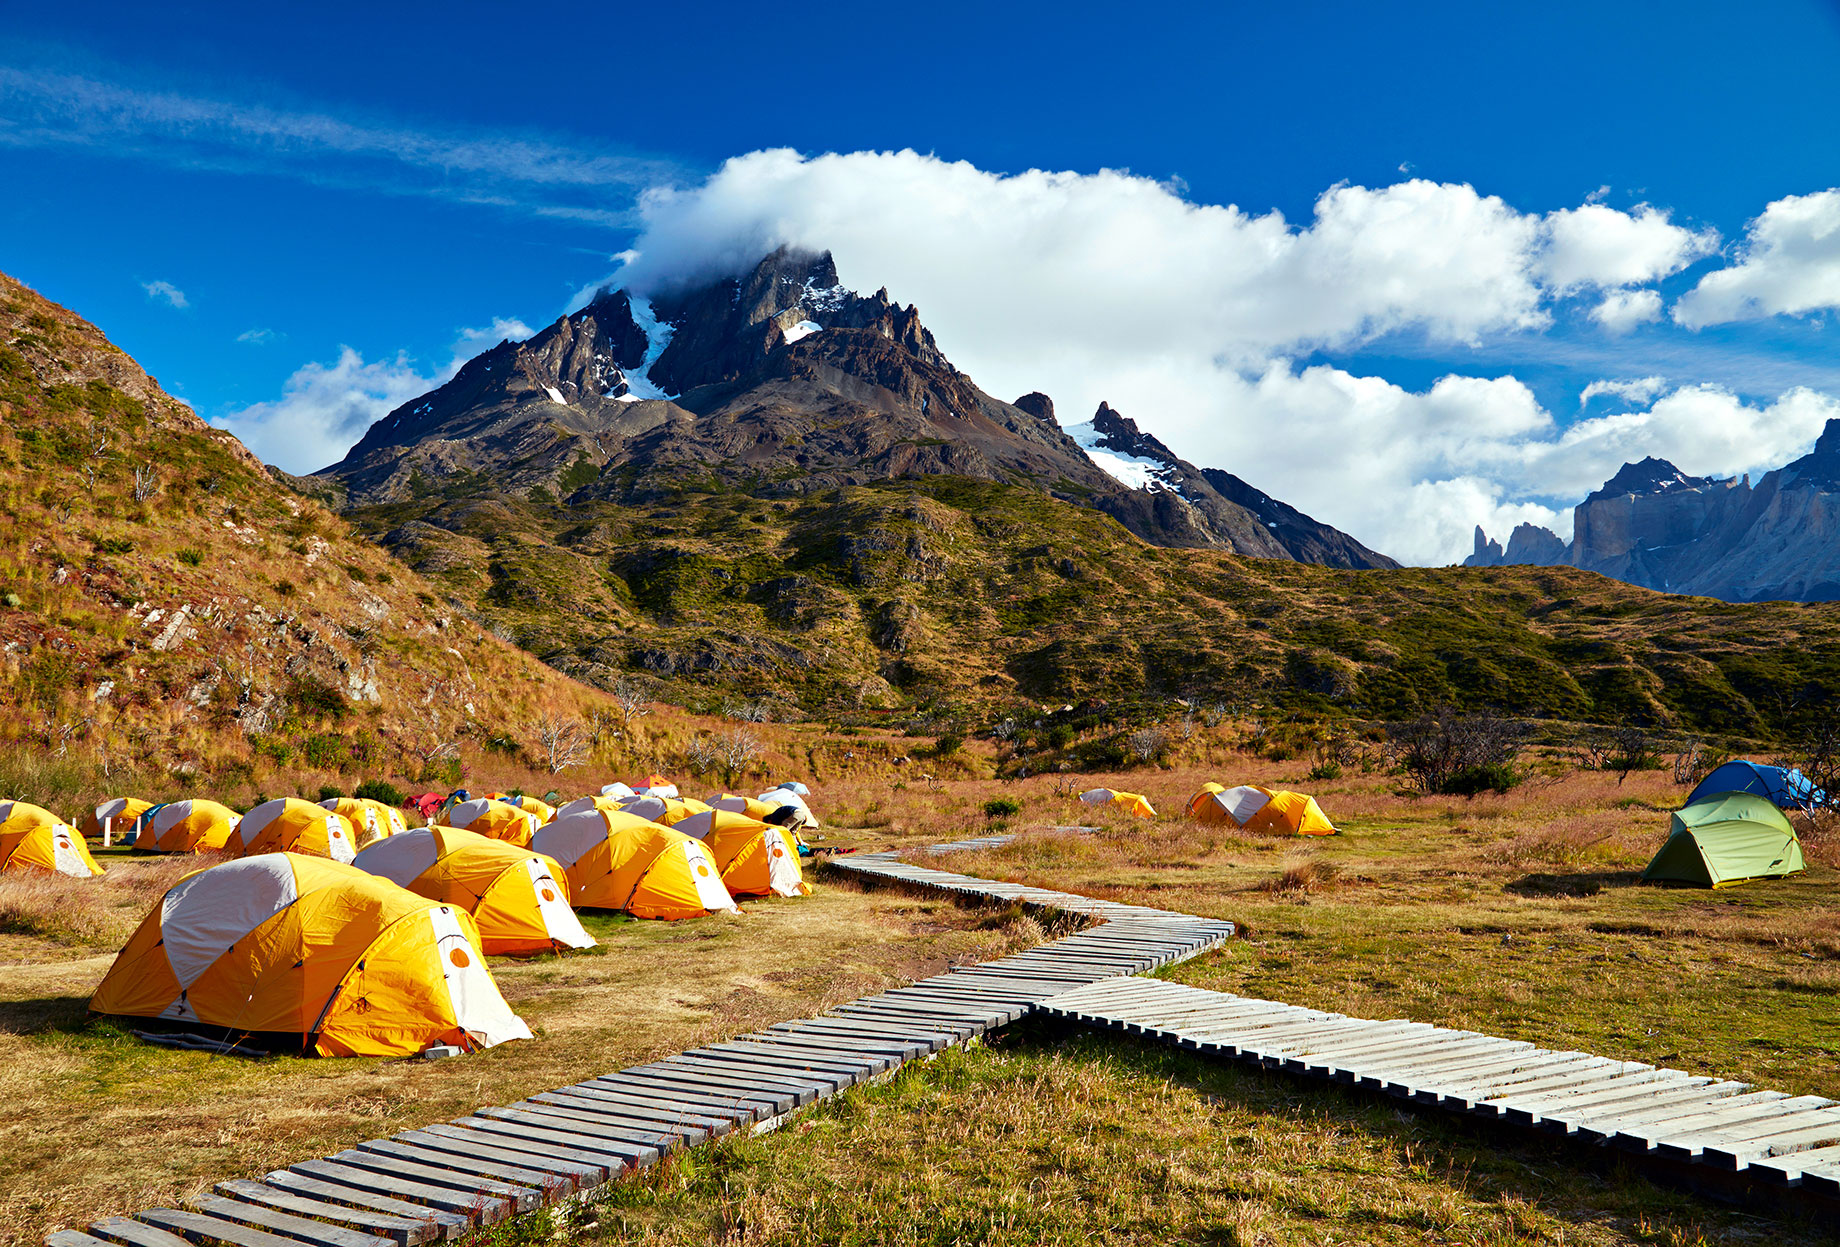 Camping in Torres del Paine National Park – Patagonia, Chile